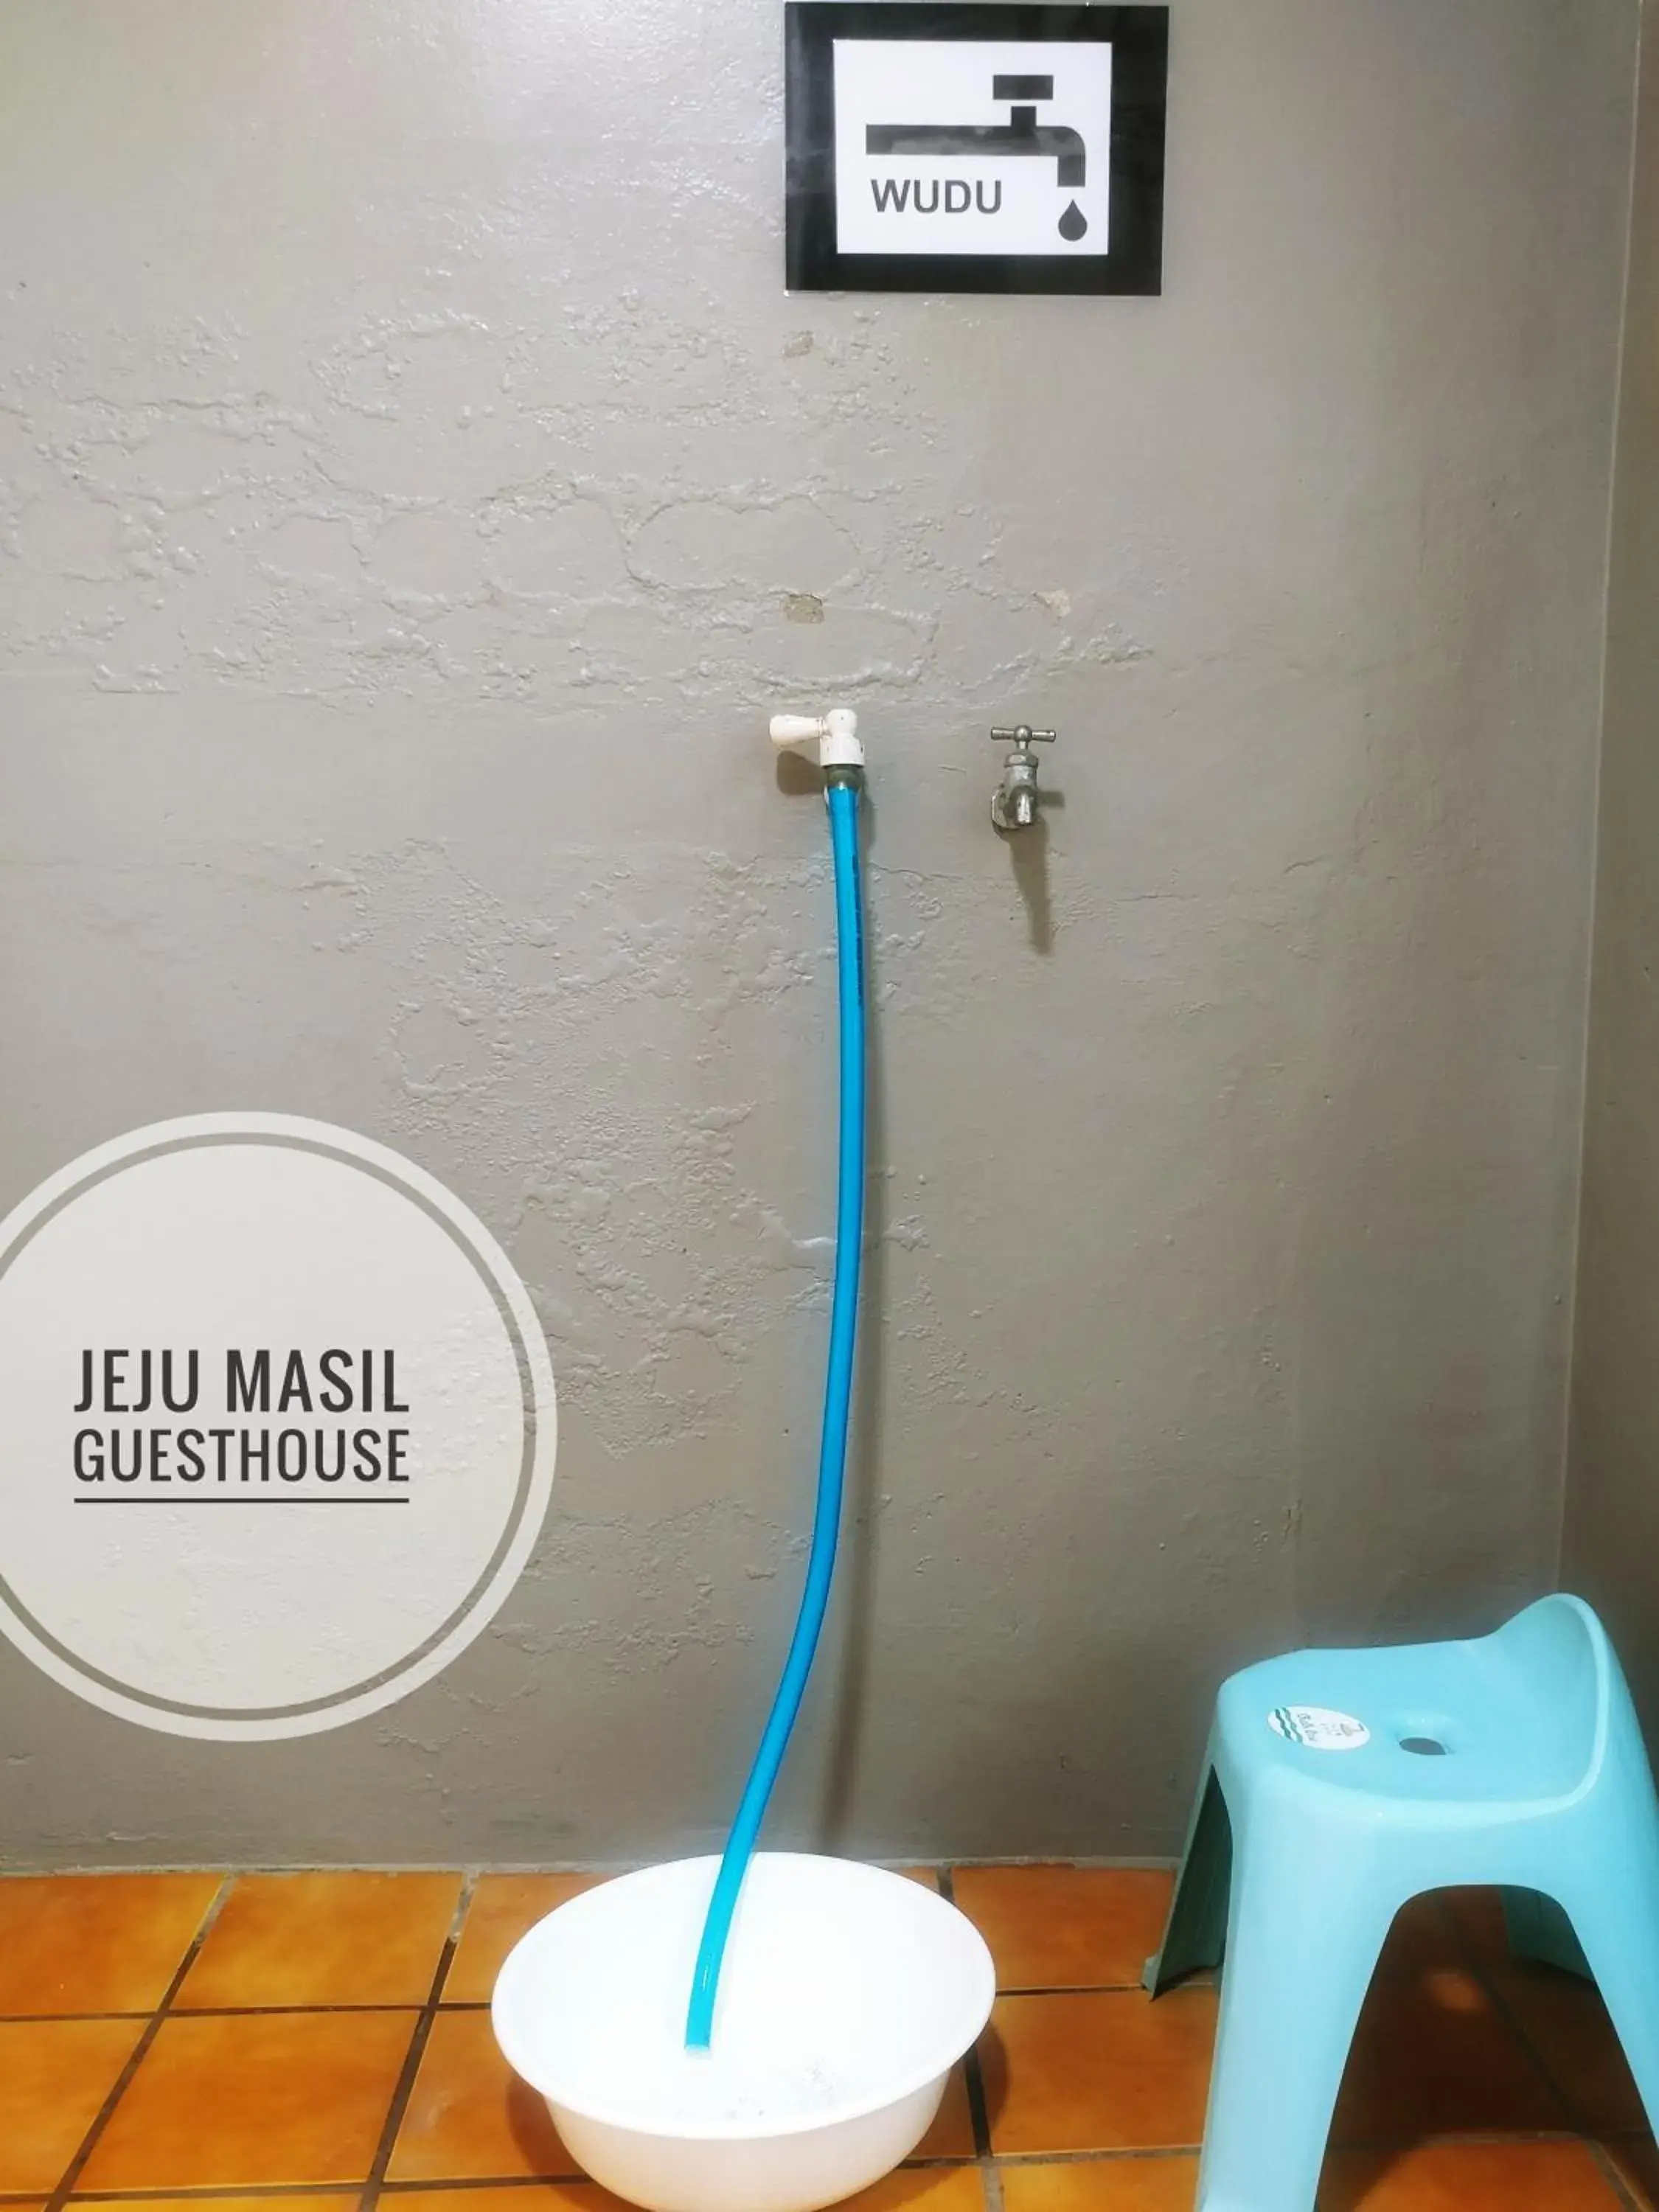 Place of worship, Bathroom in Masil Guesthouse Jeju